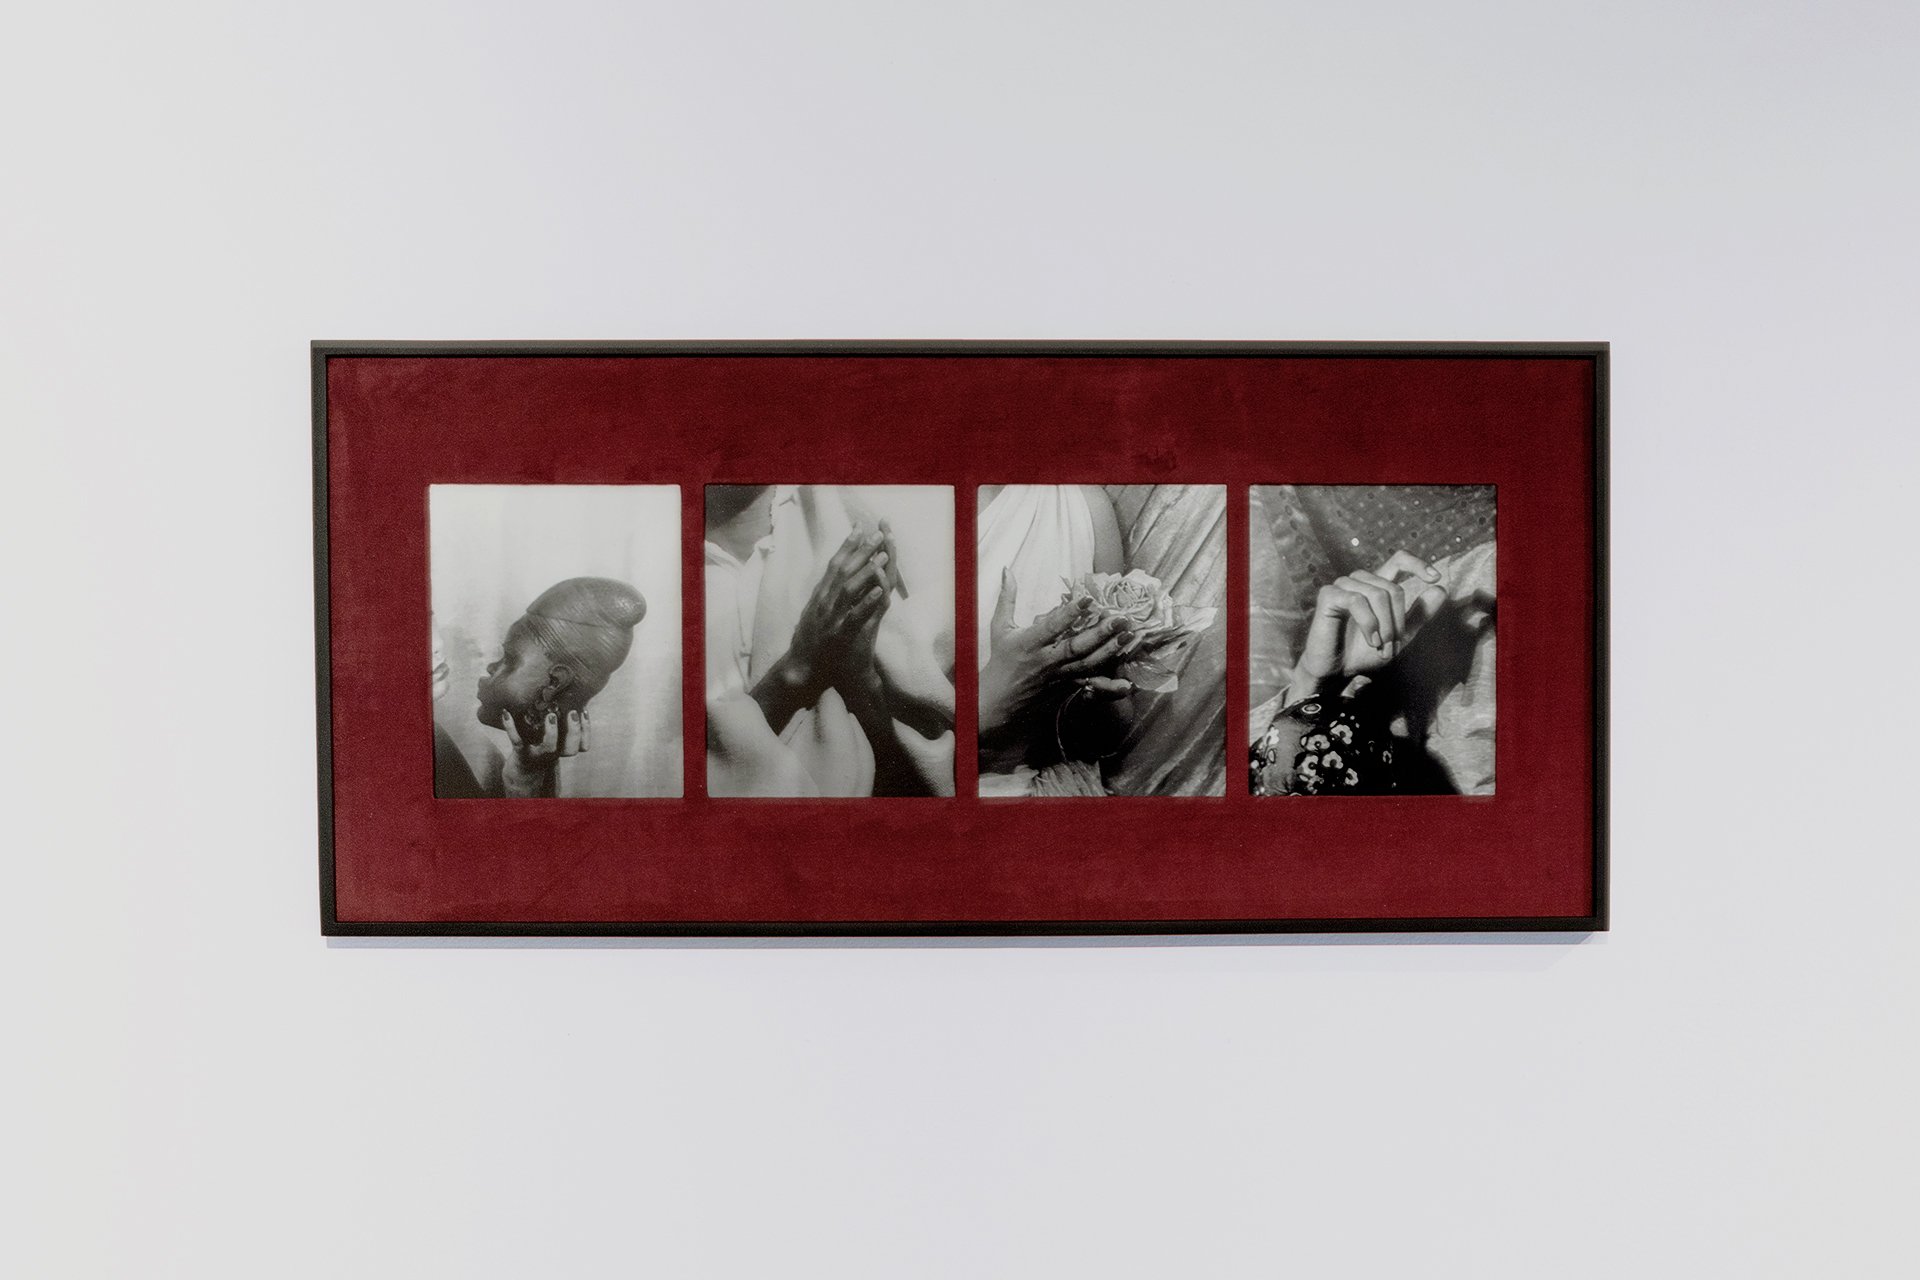   untitled (playing suit), quadriptych  2021  10x32 in., 18x40 in. with frame archival pigment prints, burgundy suede  